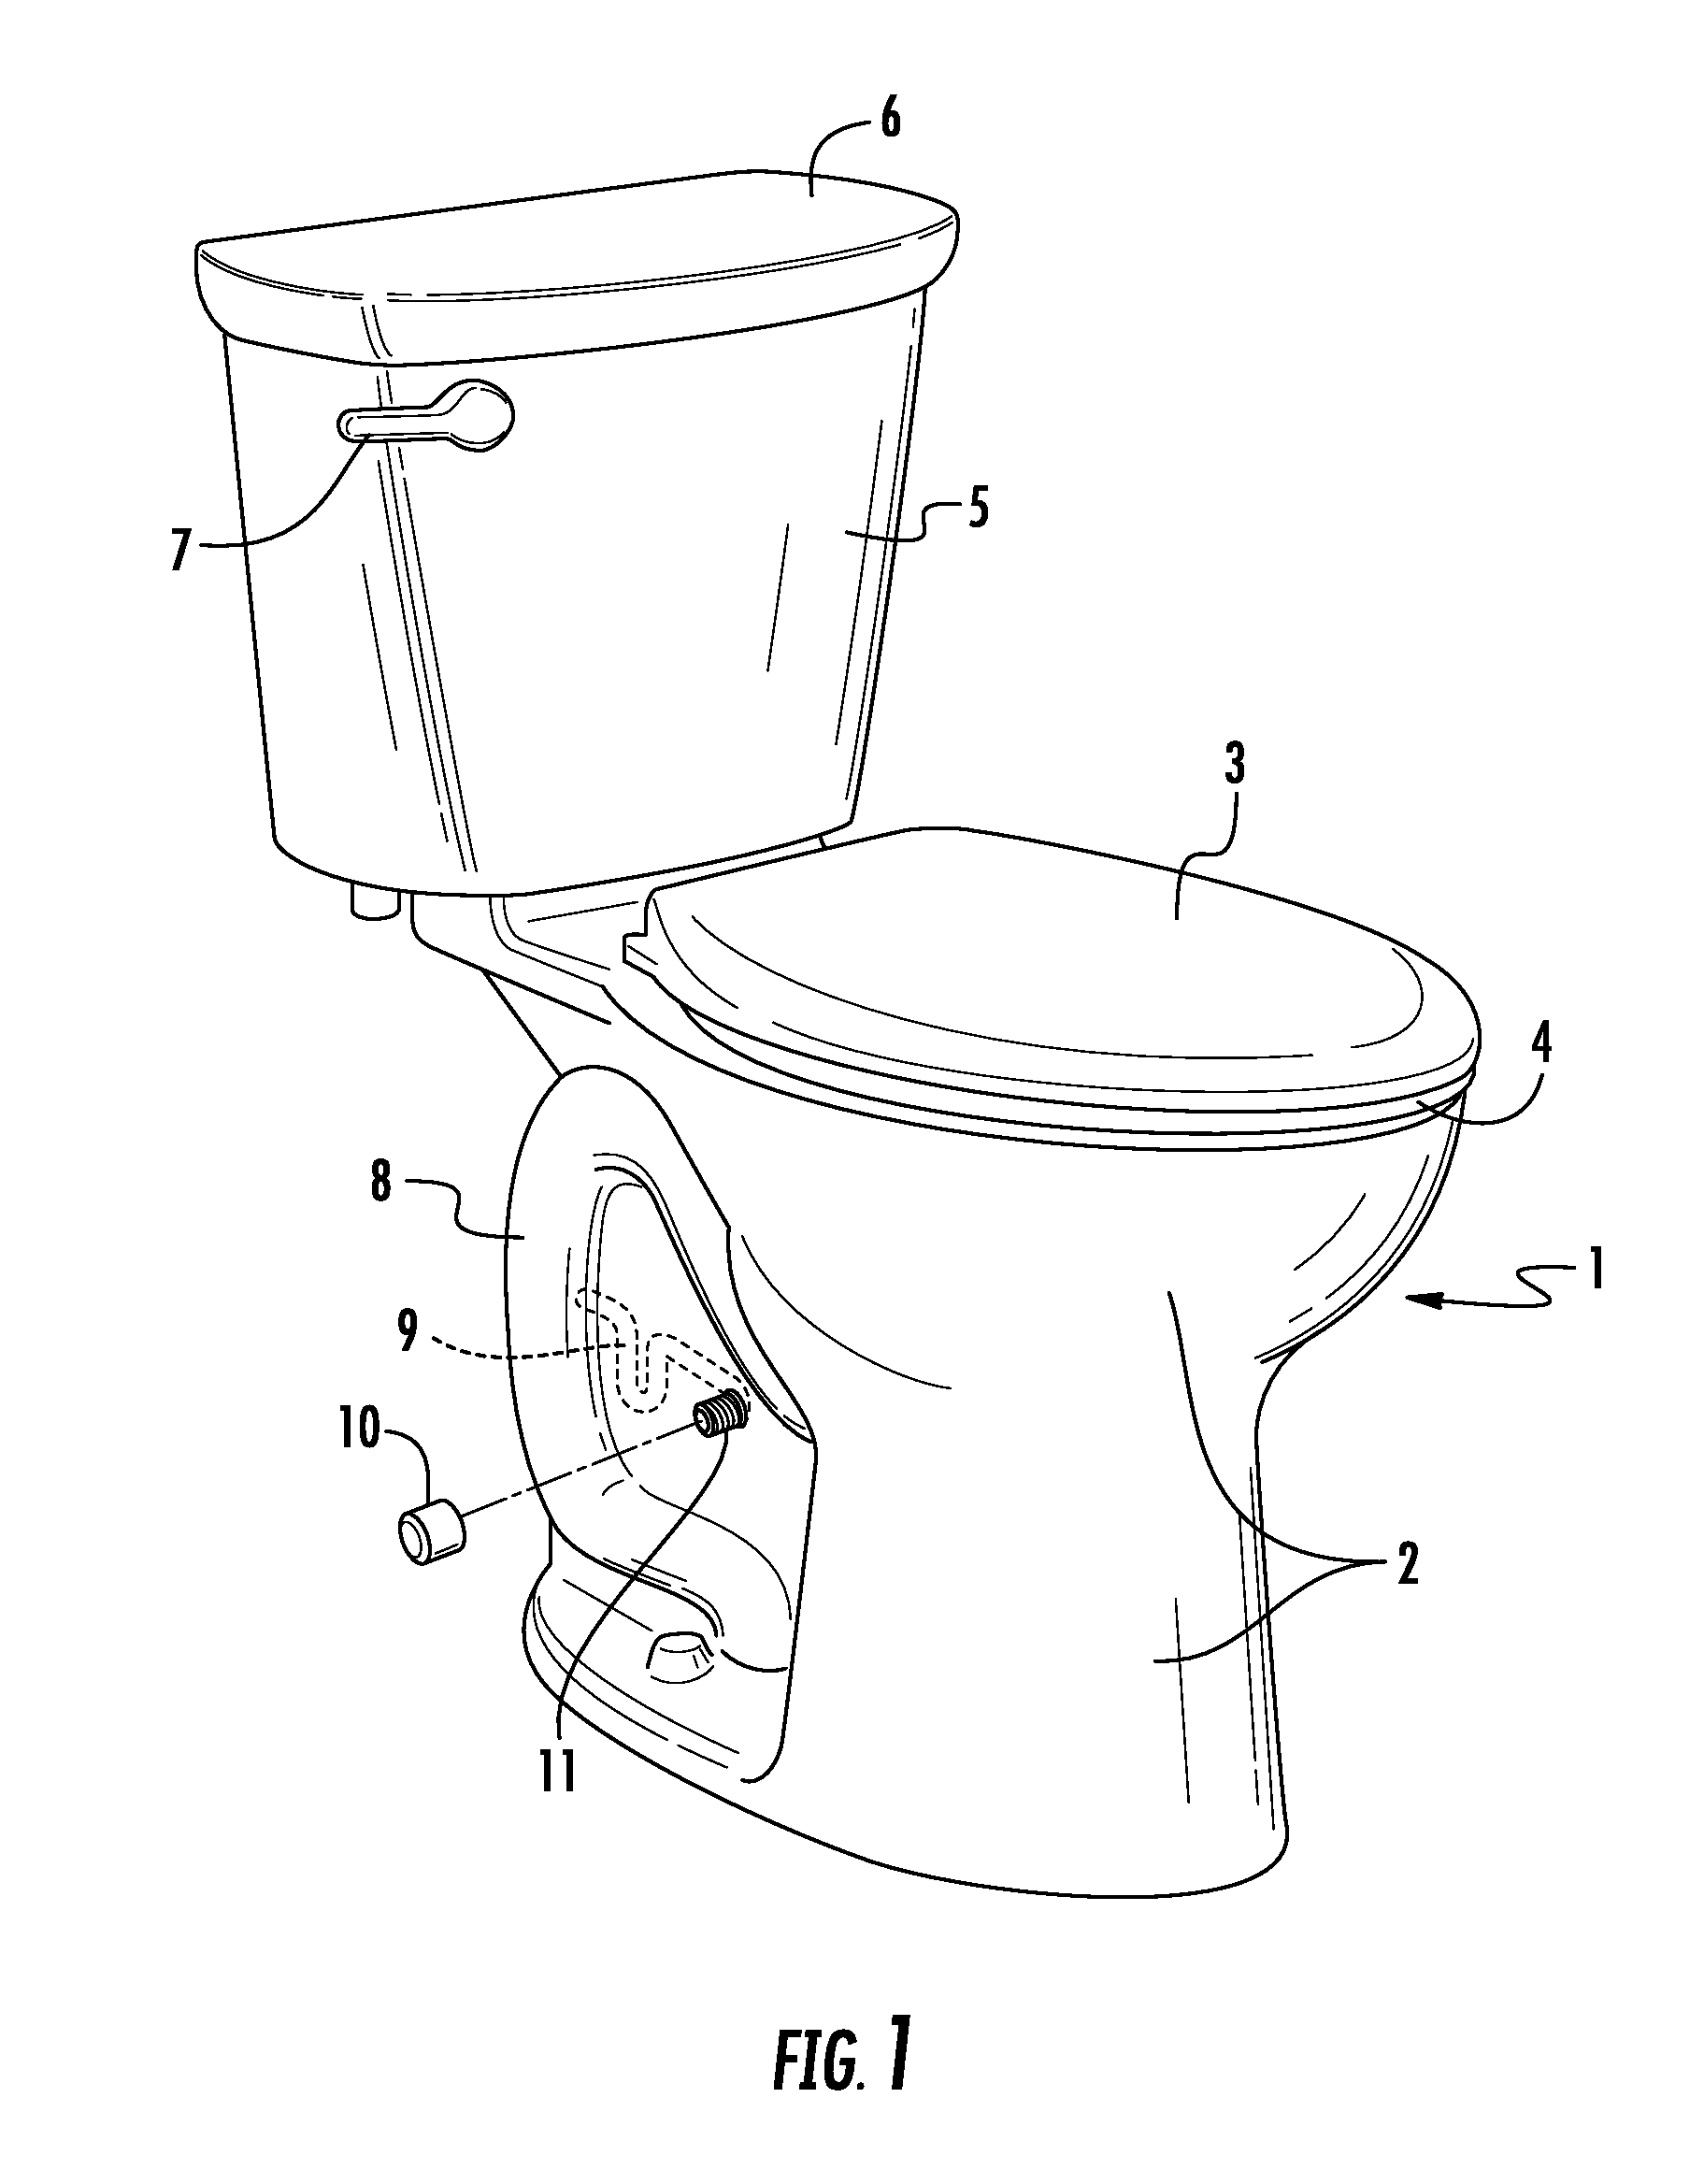 System for minimizing water usage and splash during urination